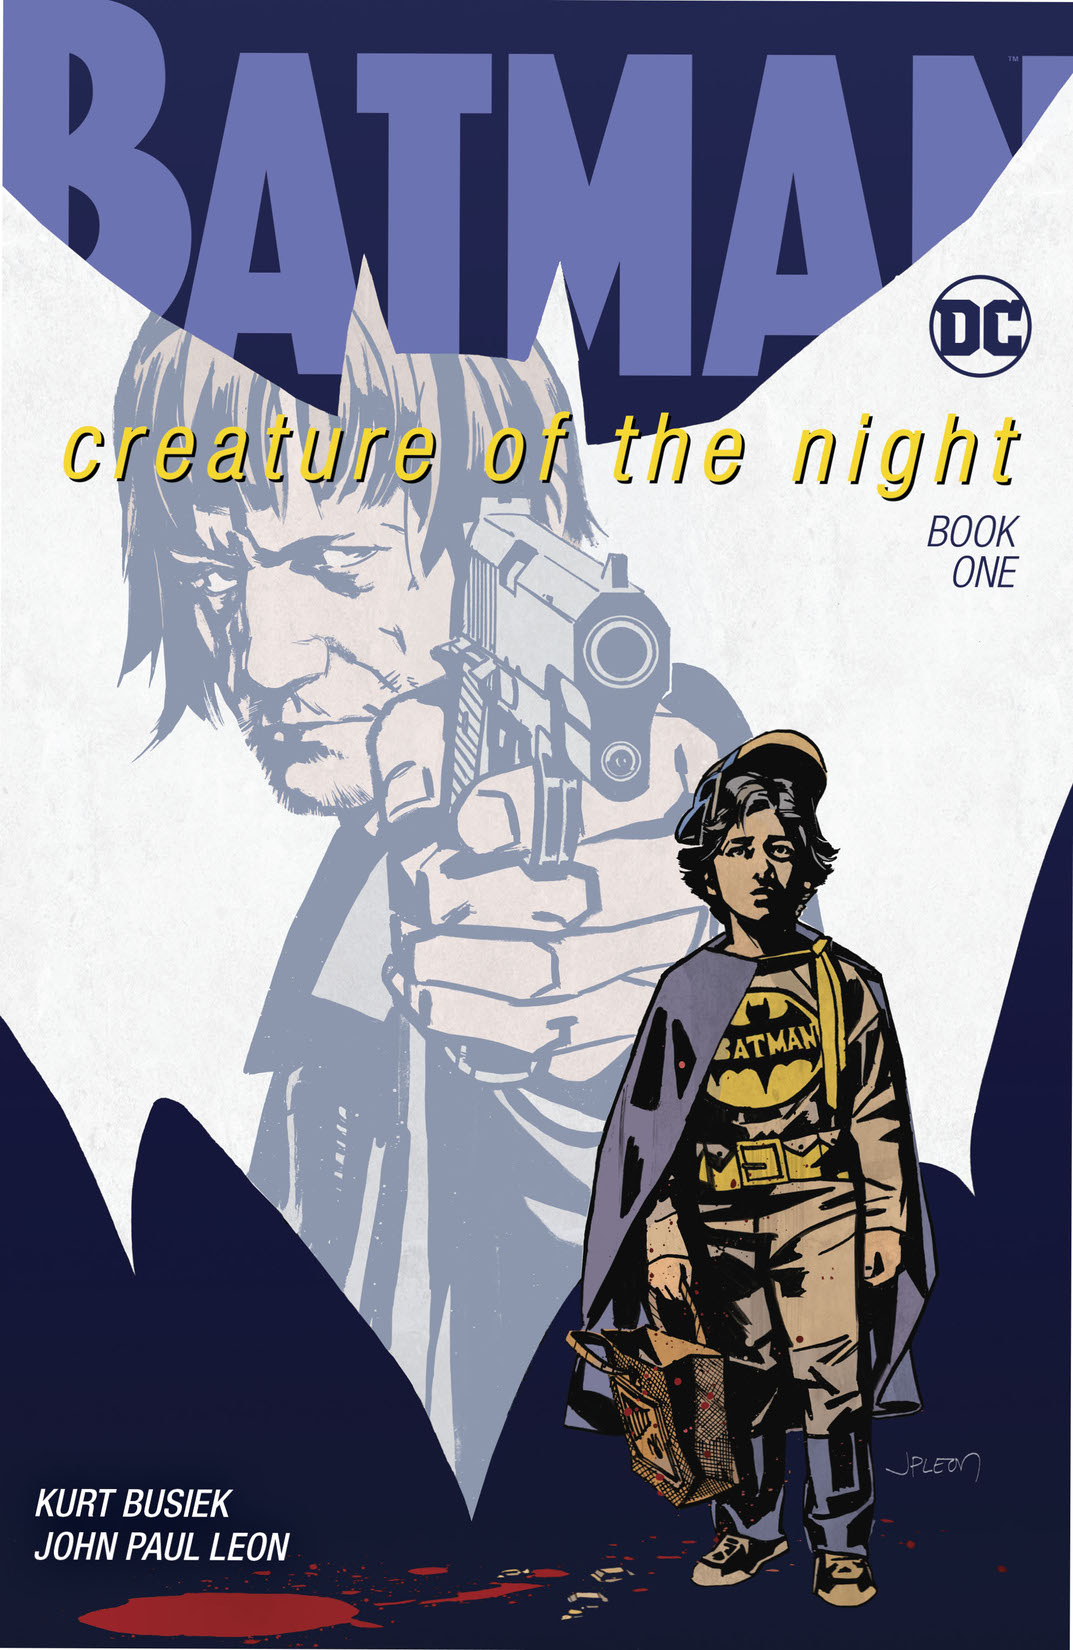 Batman: Creature of the Night #1 preview images